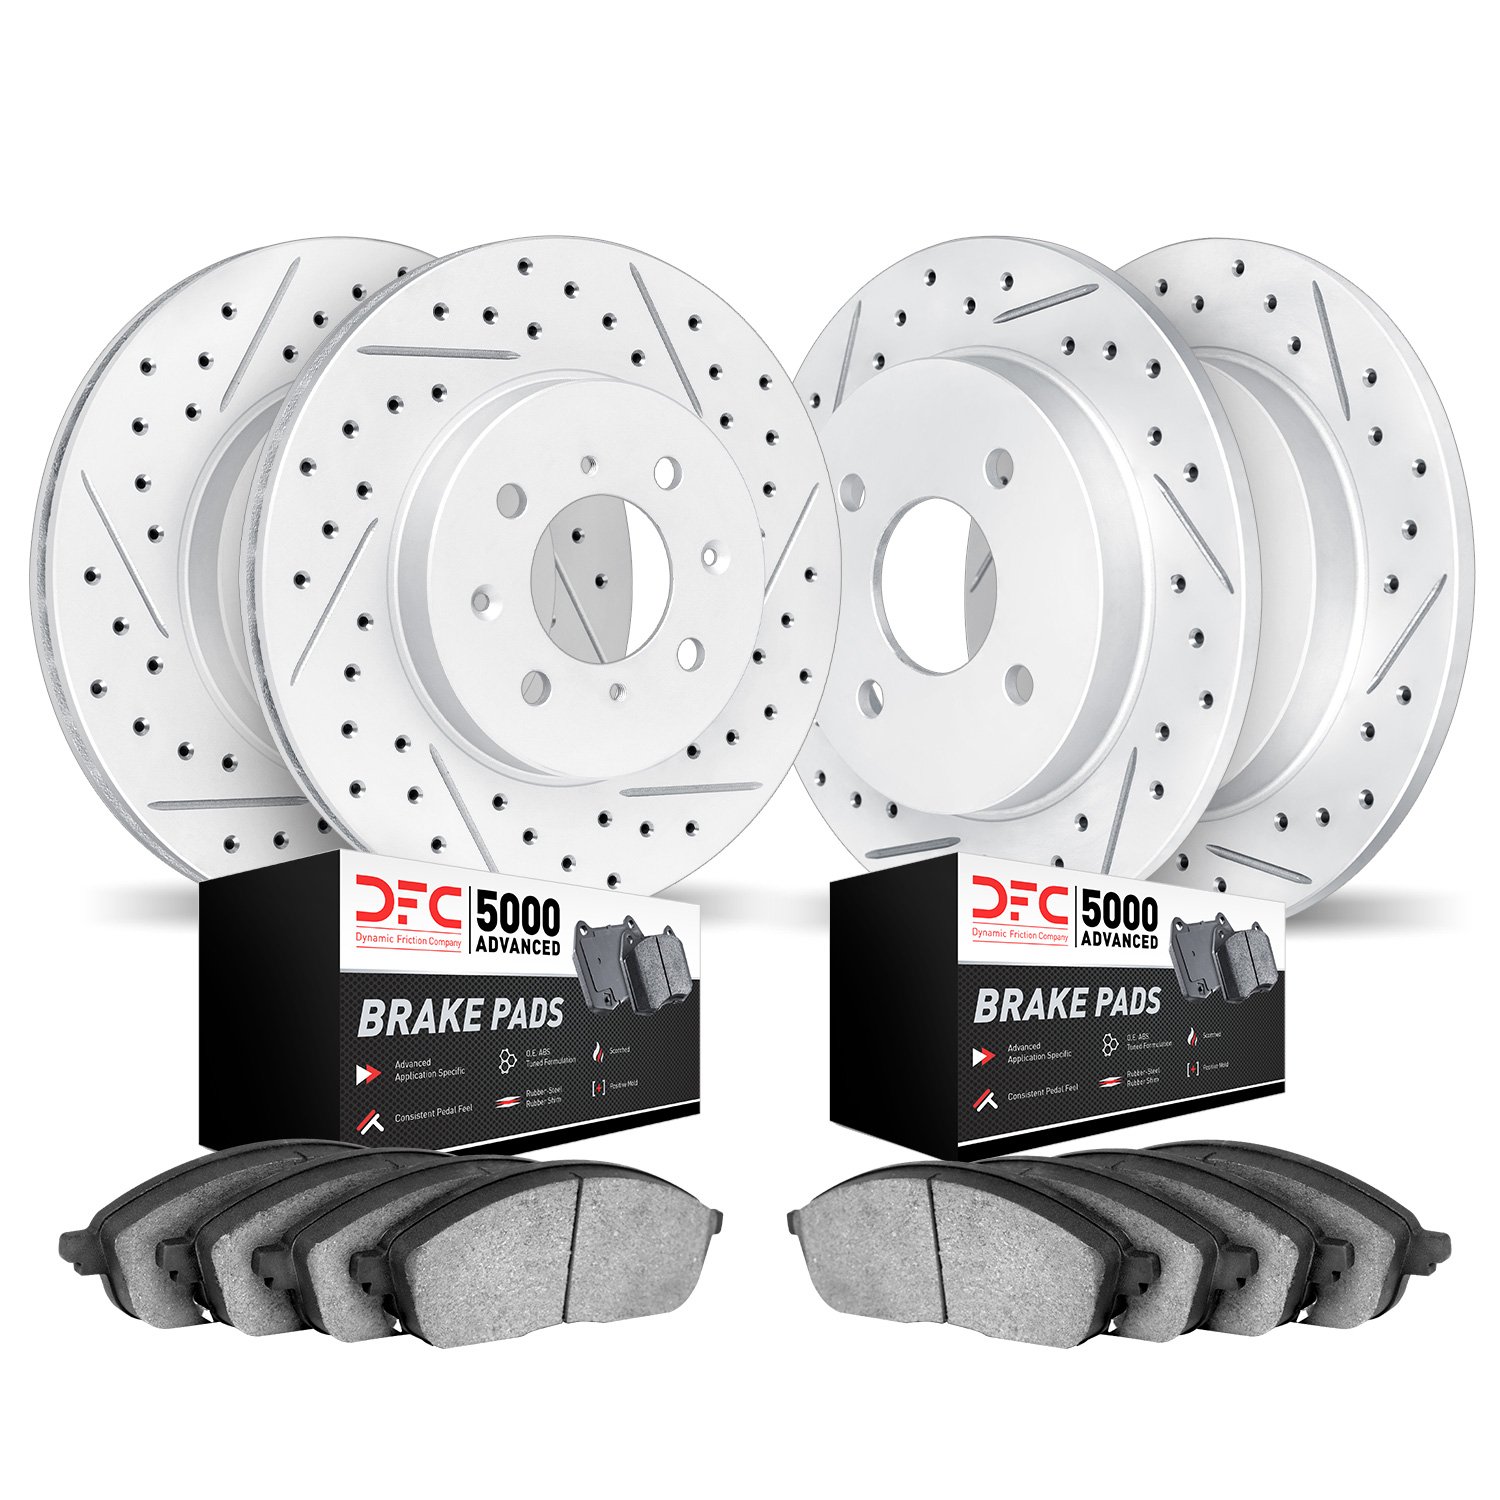 2504-32000 Geoperformance Drilled/Slotted Rotors w/5000 Advanced Brake Pads Kit, 2002-2006 Mini, Position: Front and Rear